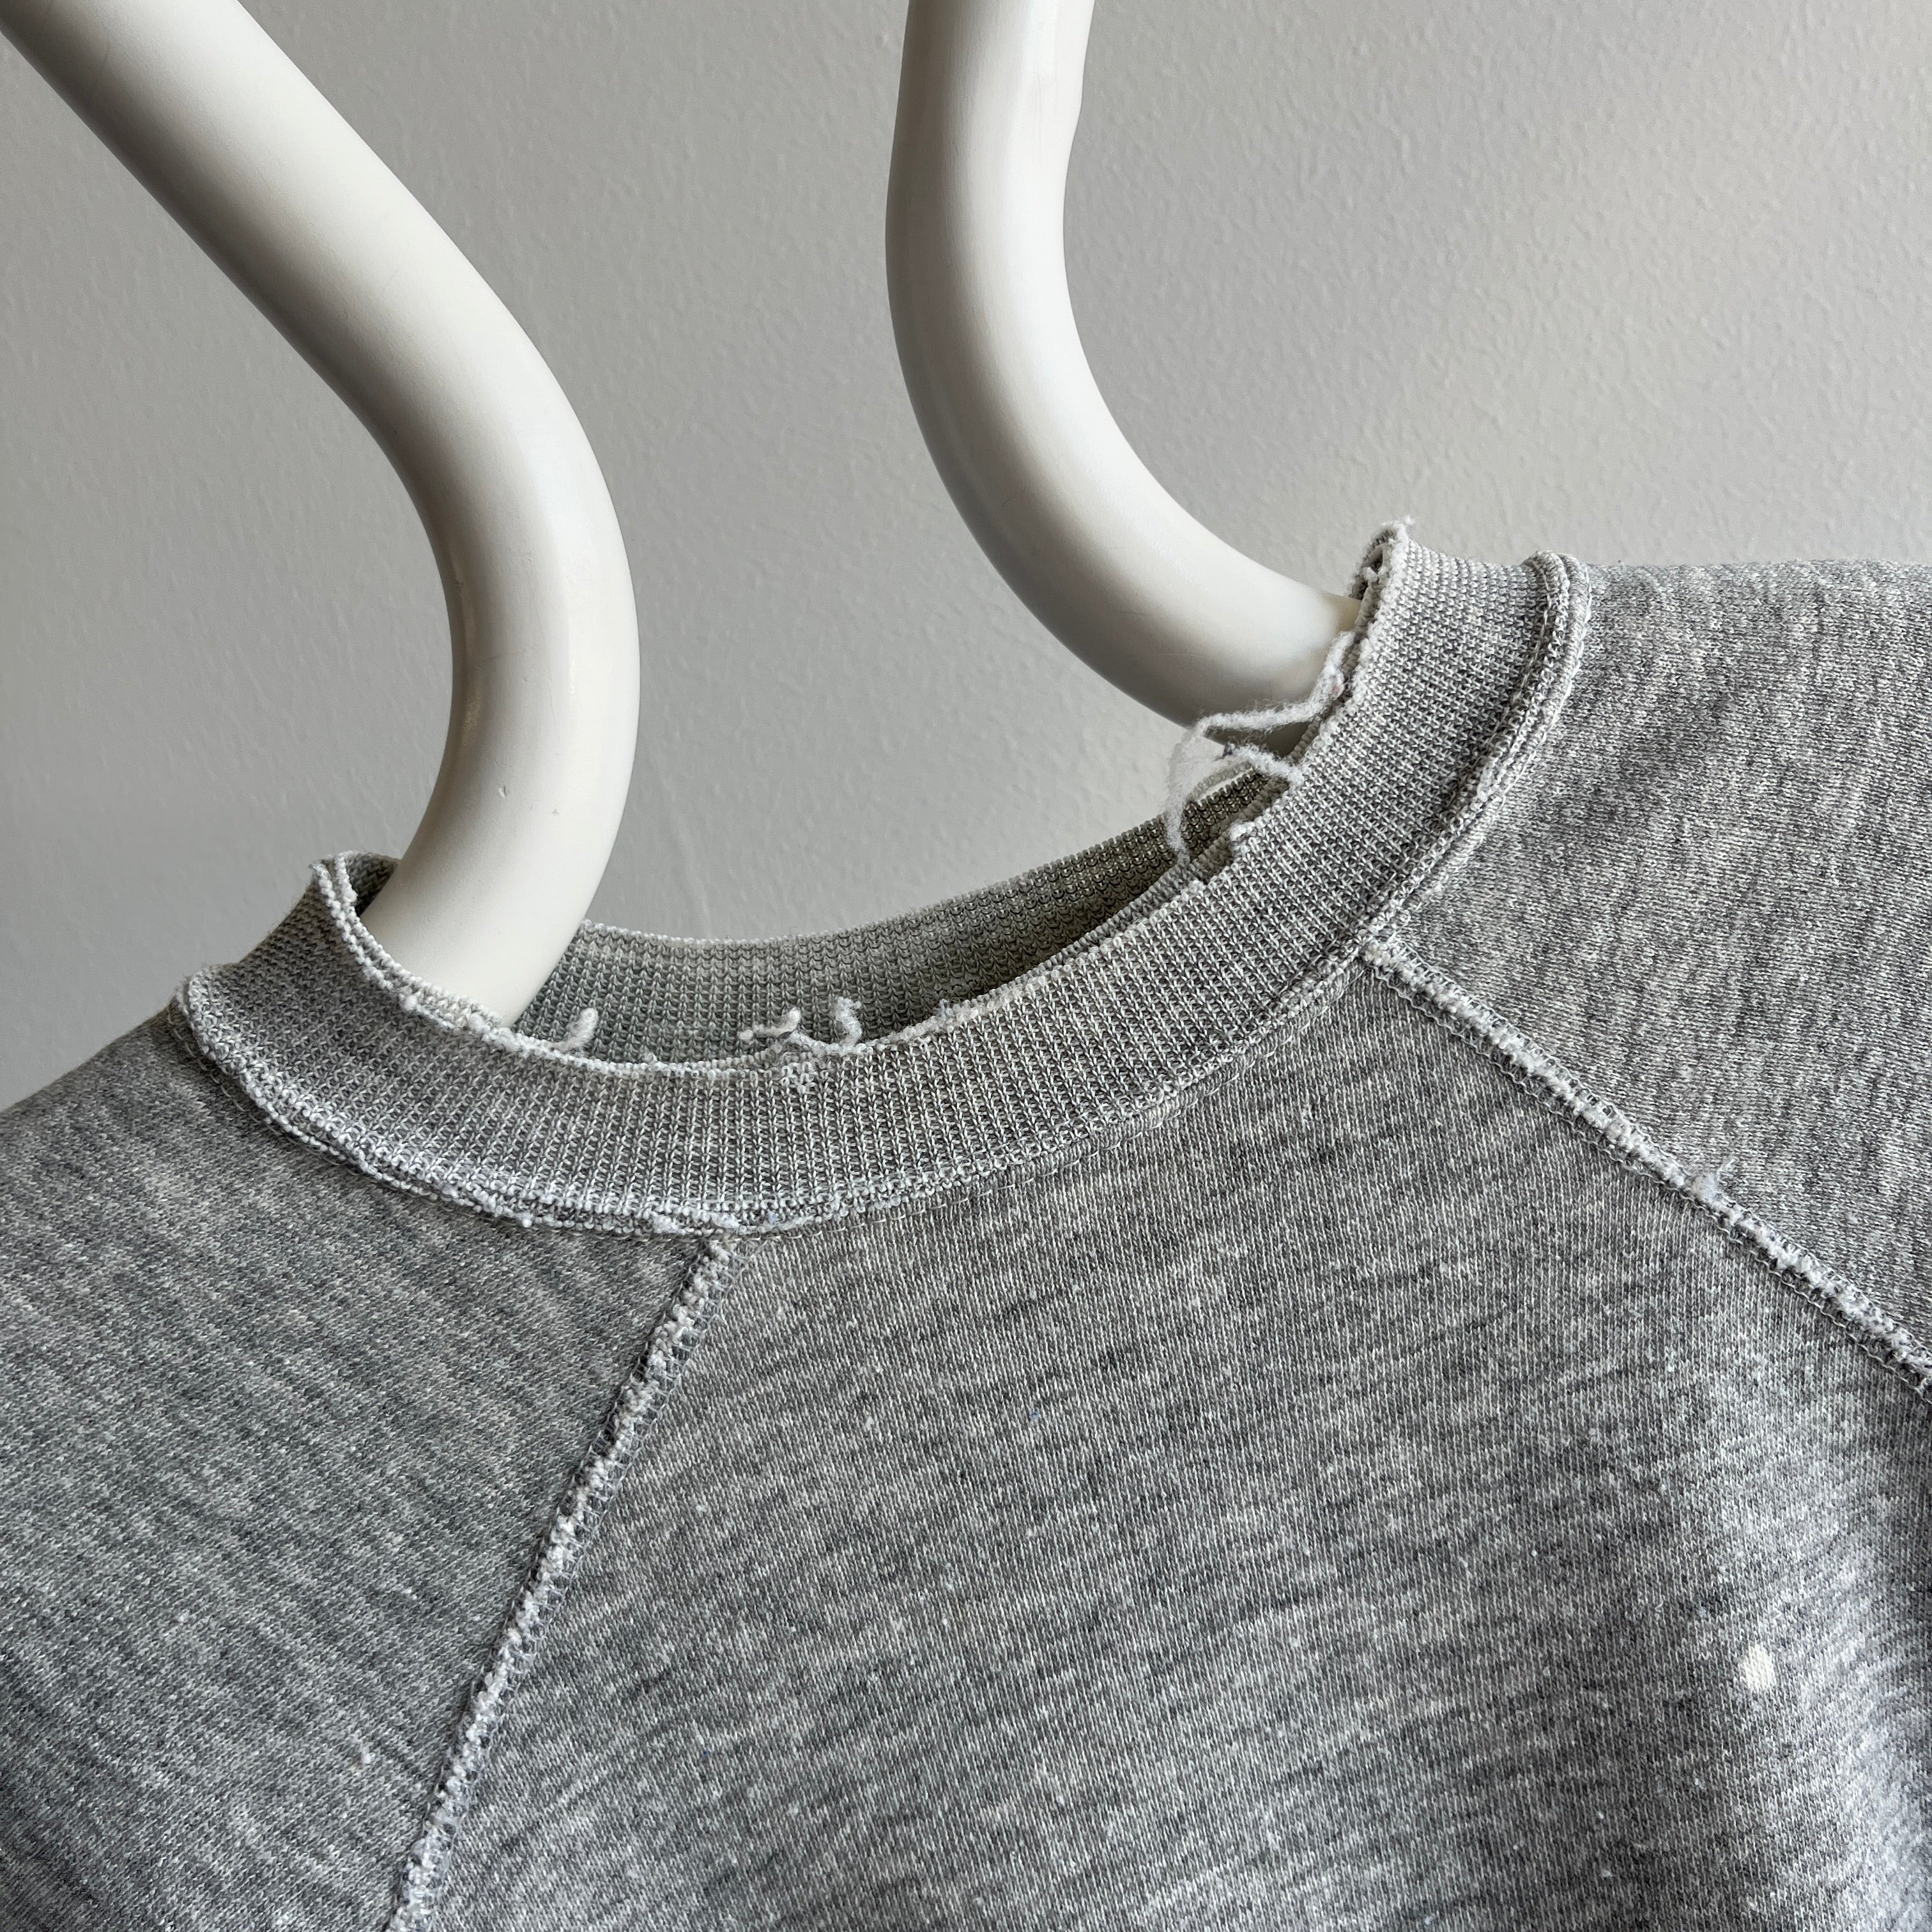 1980s Super Tattered, Torn and Worn Bleach Stained Blank Gray Sweatshirt